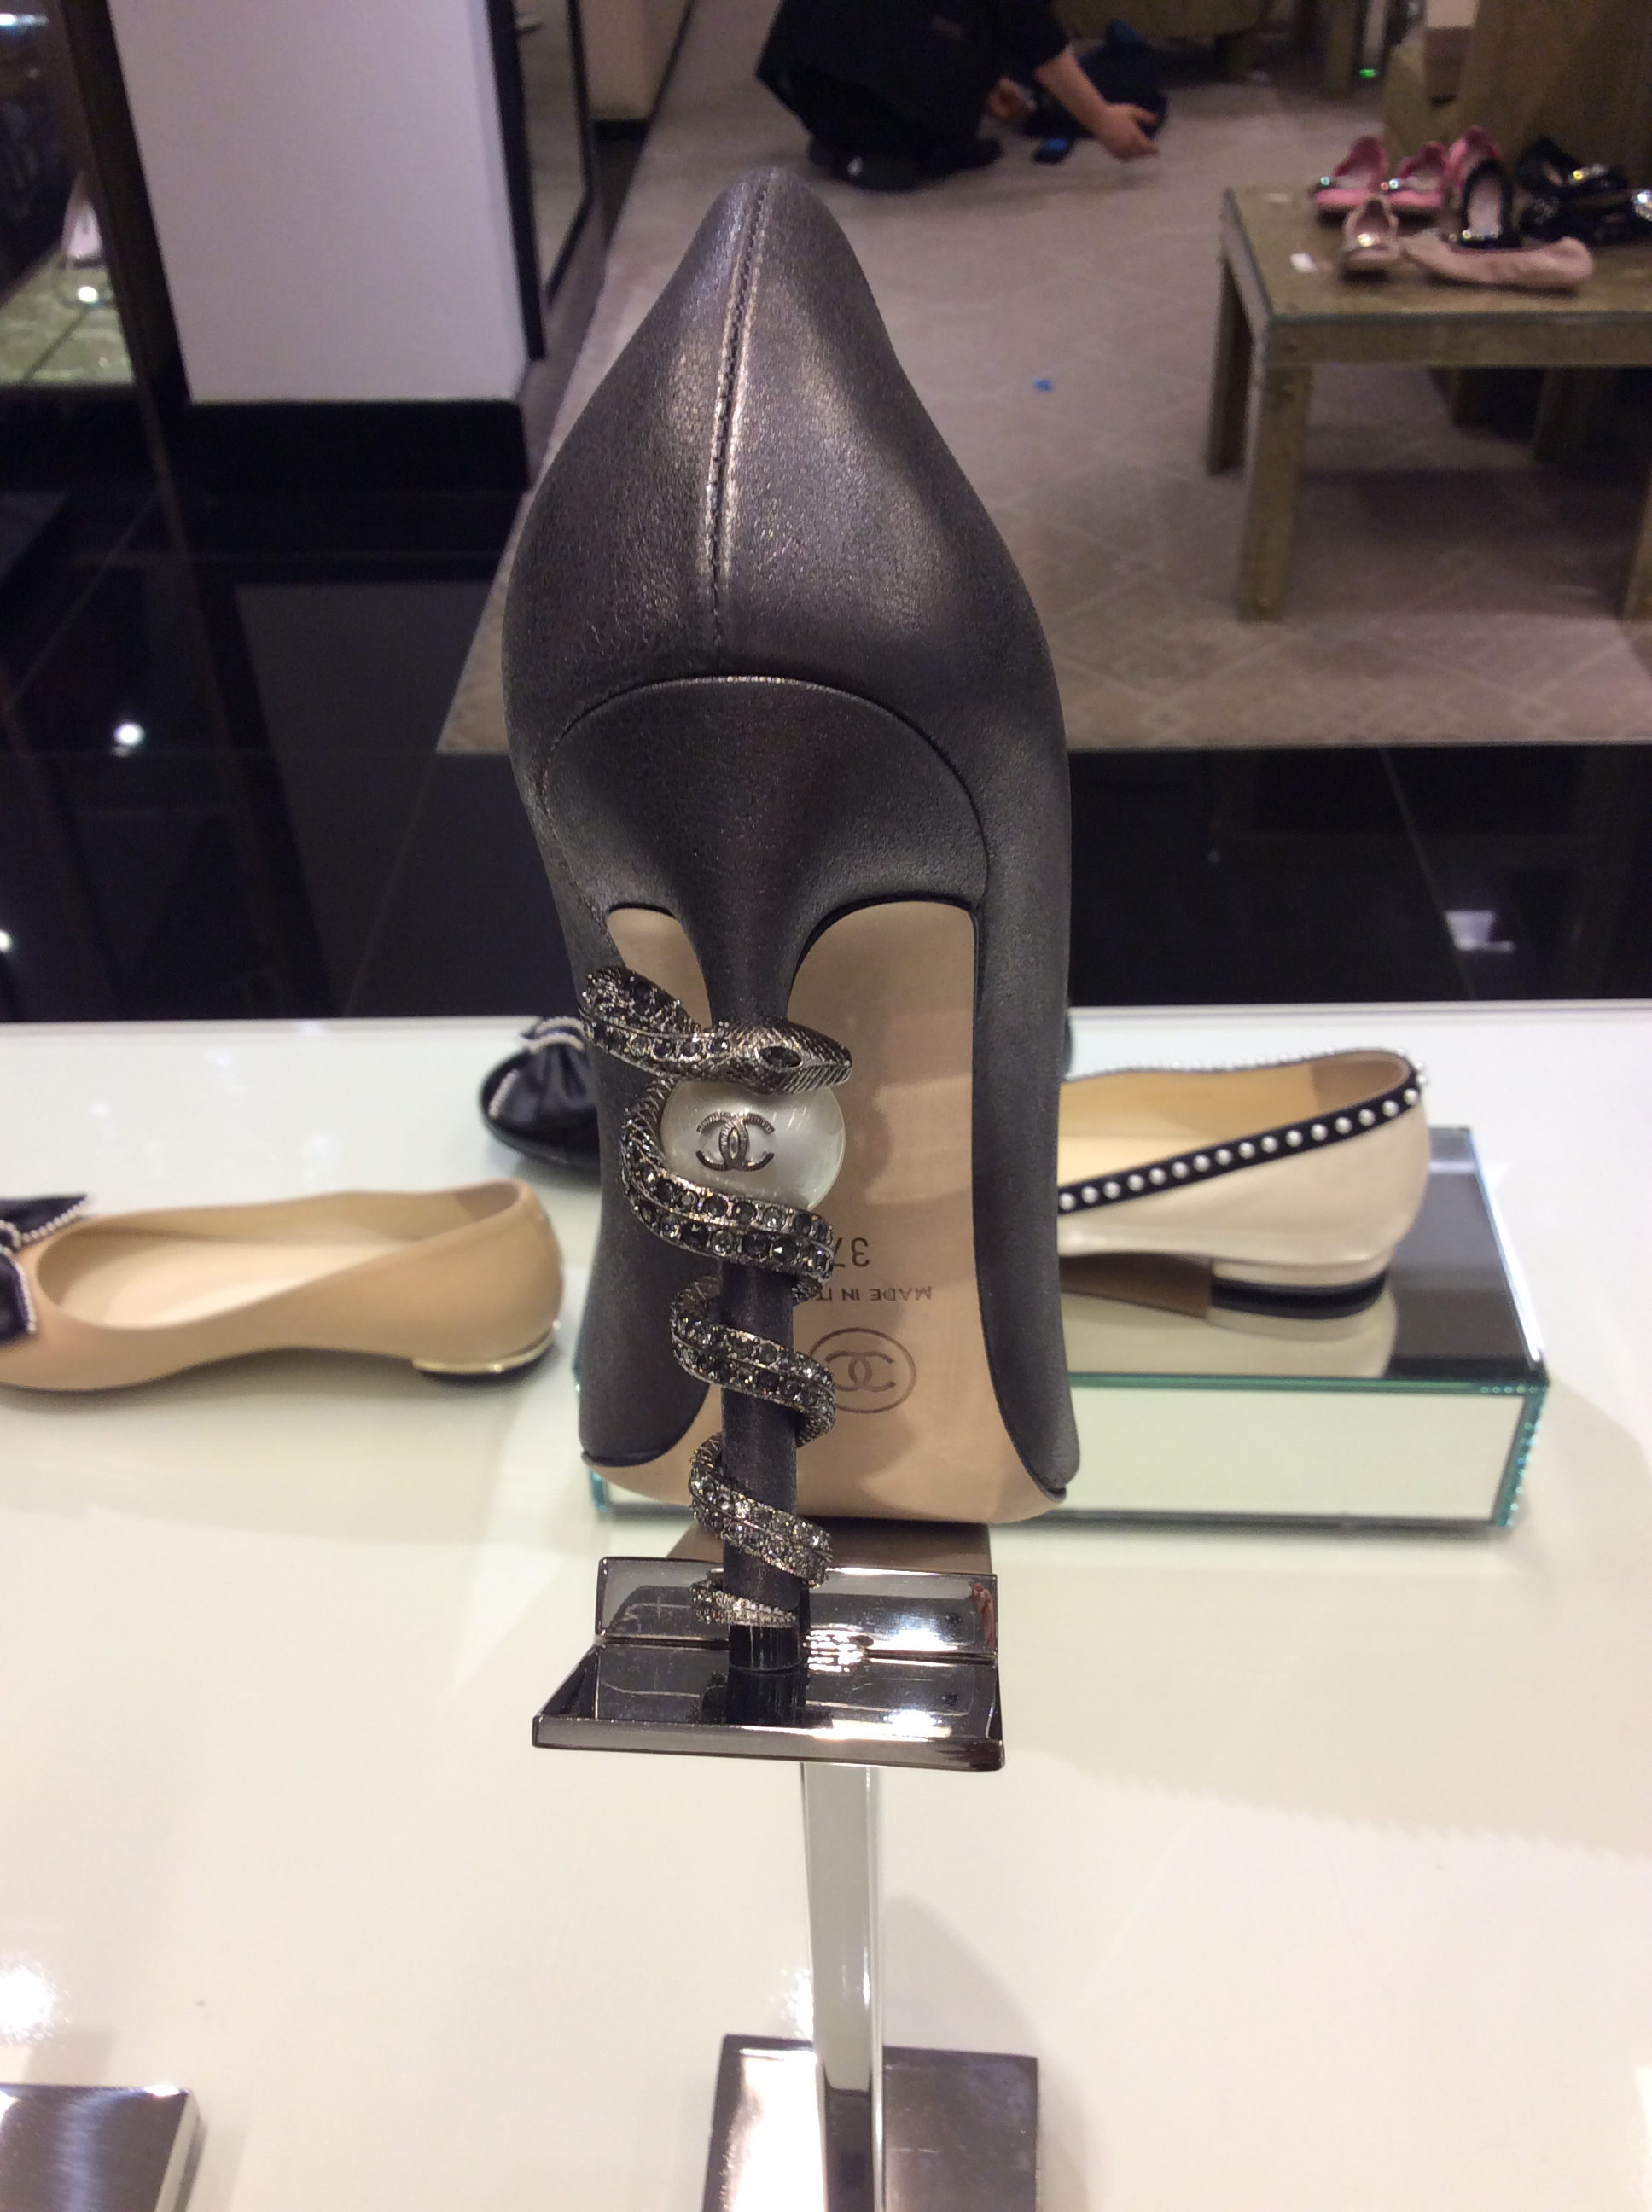 Chanel Shoes | In-Store Trends at Bloomingdale's - Fashion Trendsetter